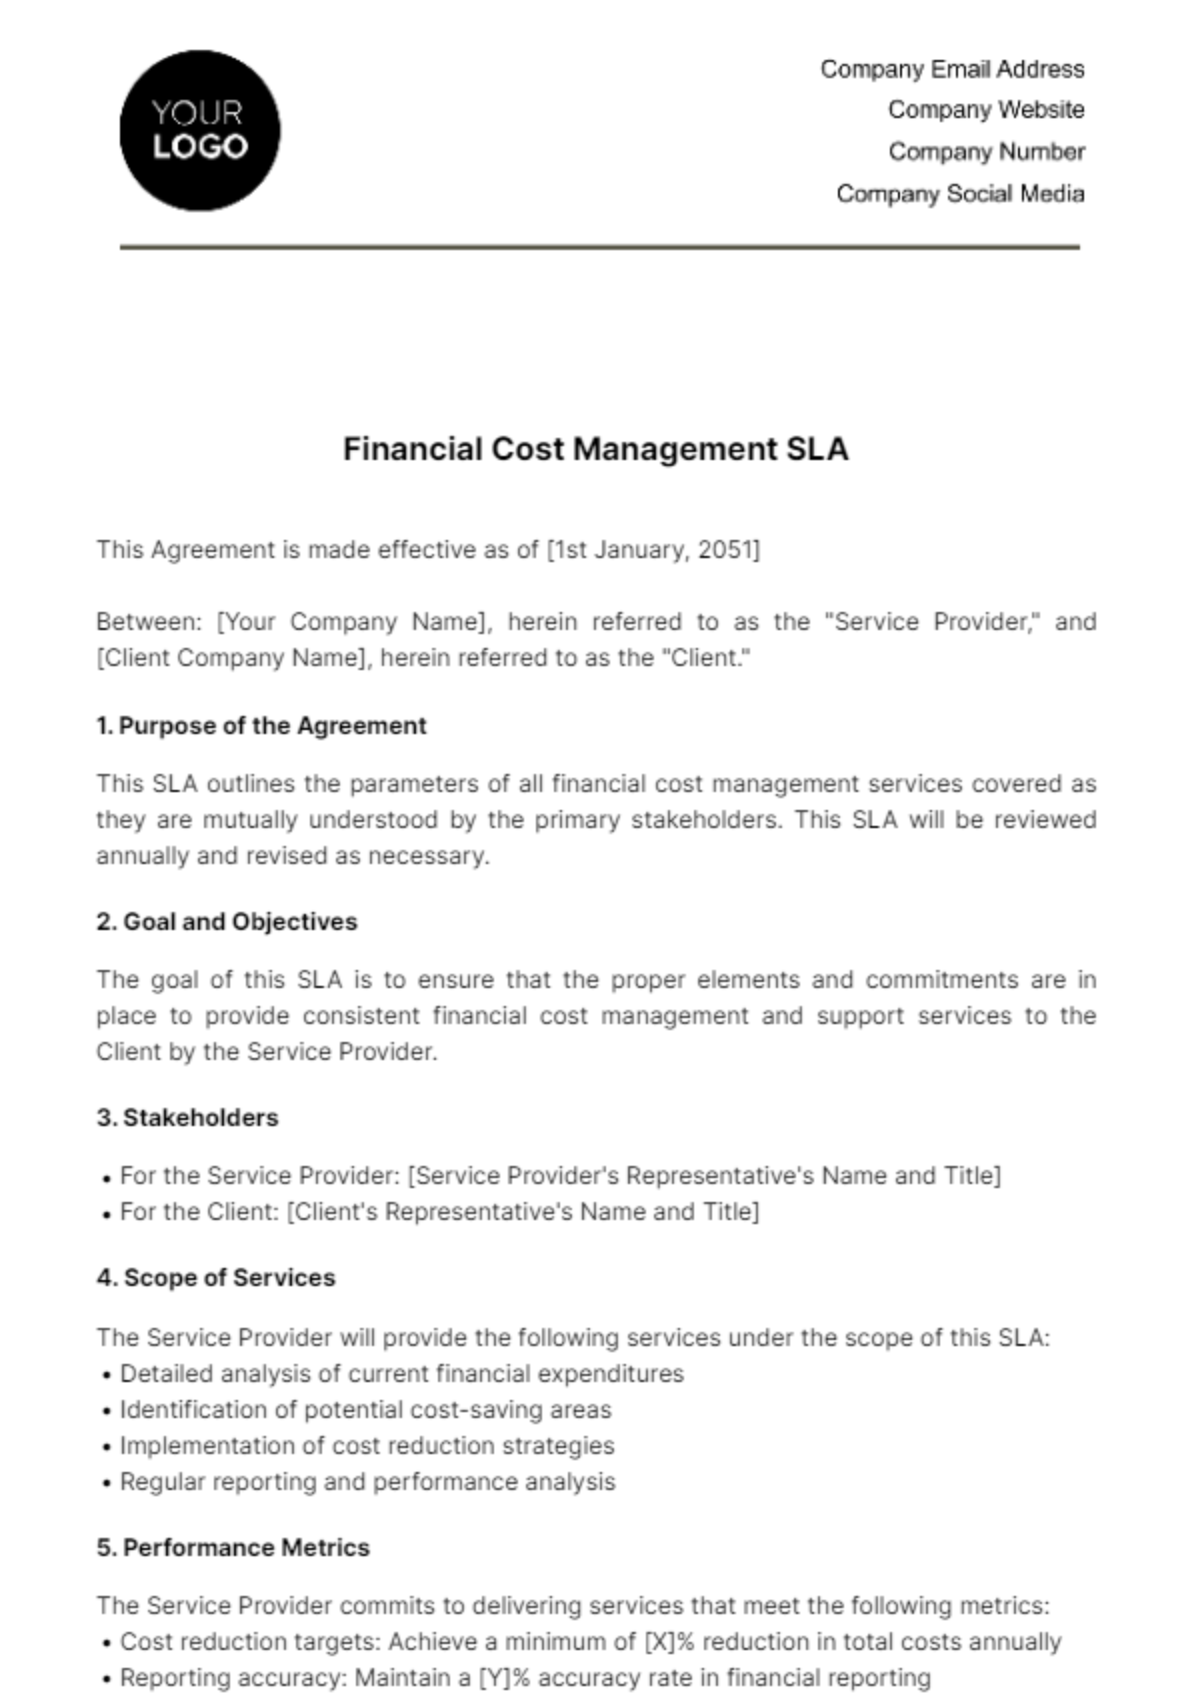 Free Financial Cost Management SLA Template